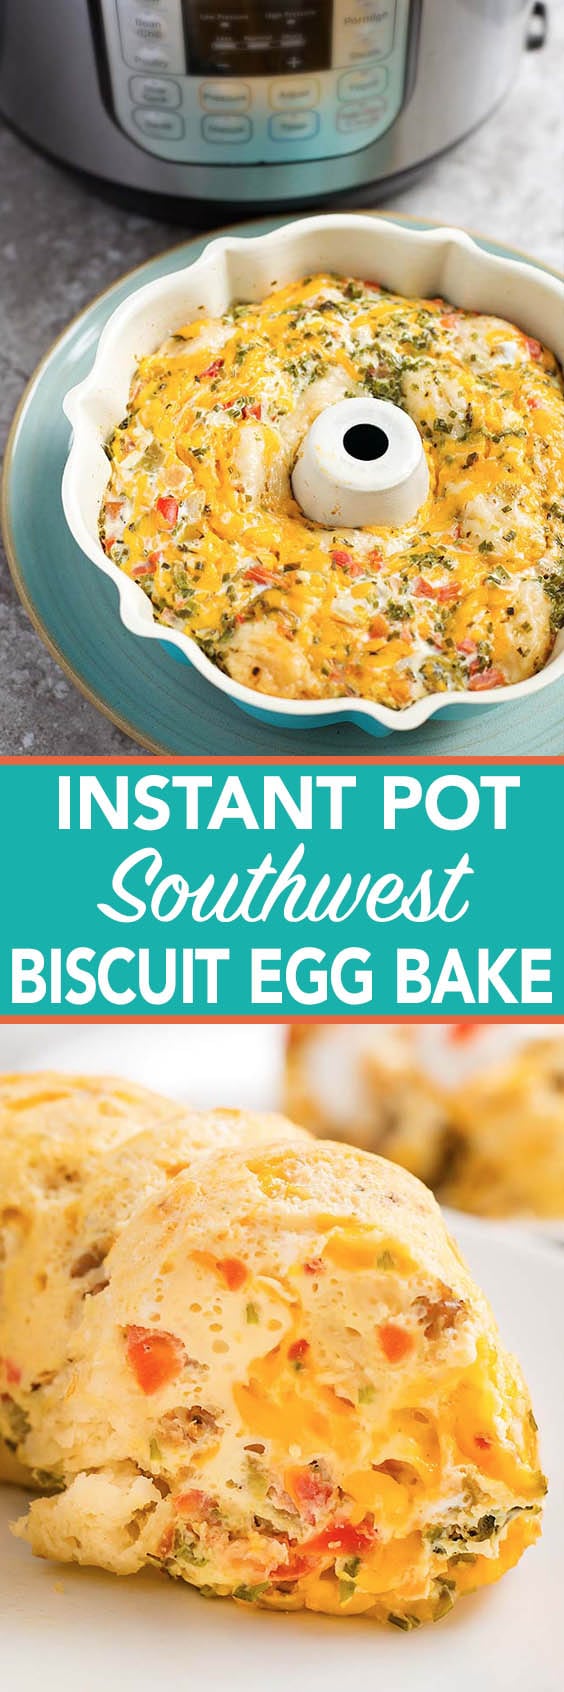 Instant pot southwest egg bake has salsa, cheese, and is a breakfast casserole you cook in your pressure cooker. simplyhappyfoodie.com #instantpotrecipes #instantpoteggbake #instantpoteggs